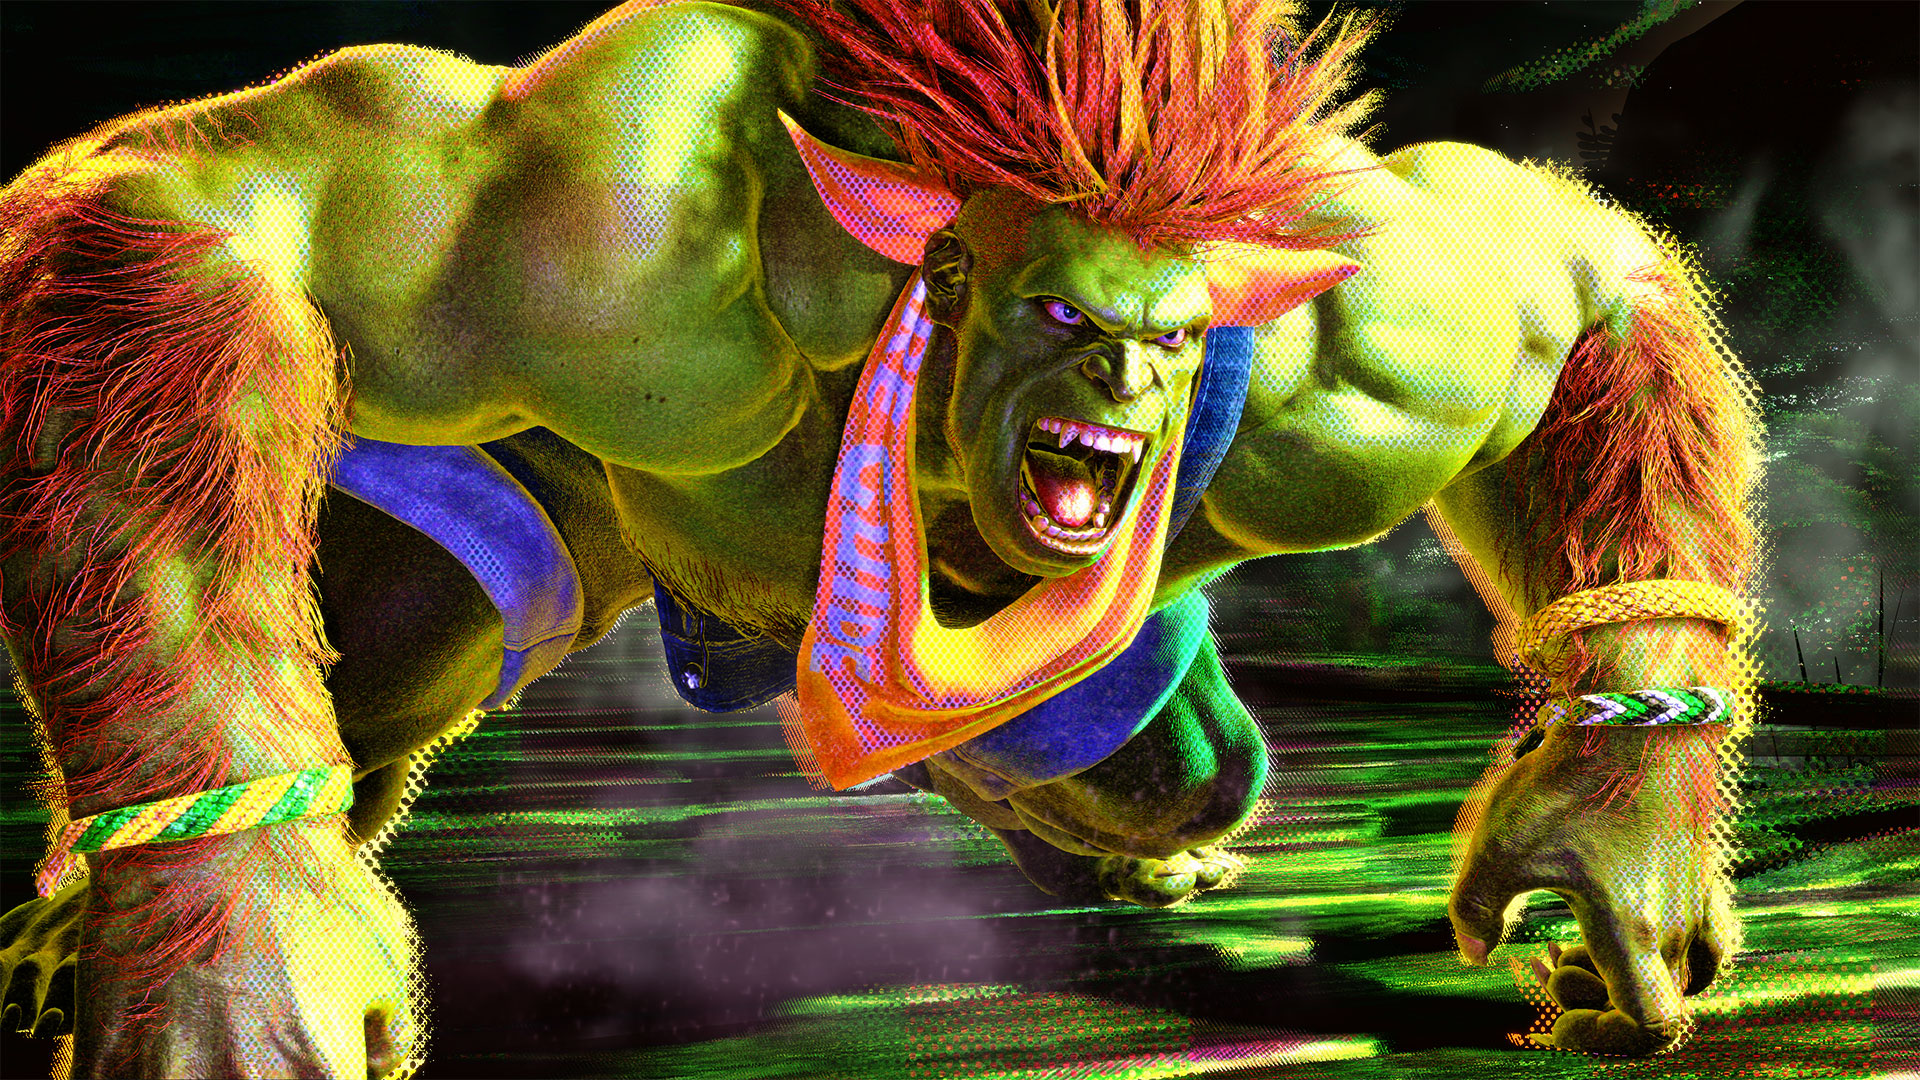 Street Fighter 5 Blanka tips: How to play with him